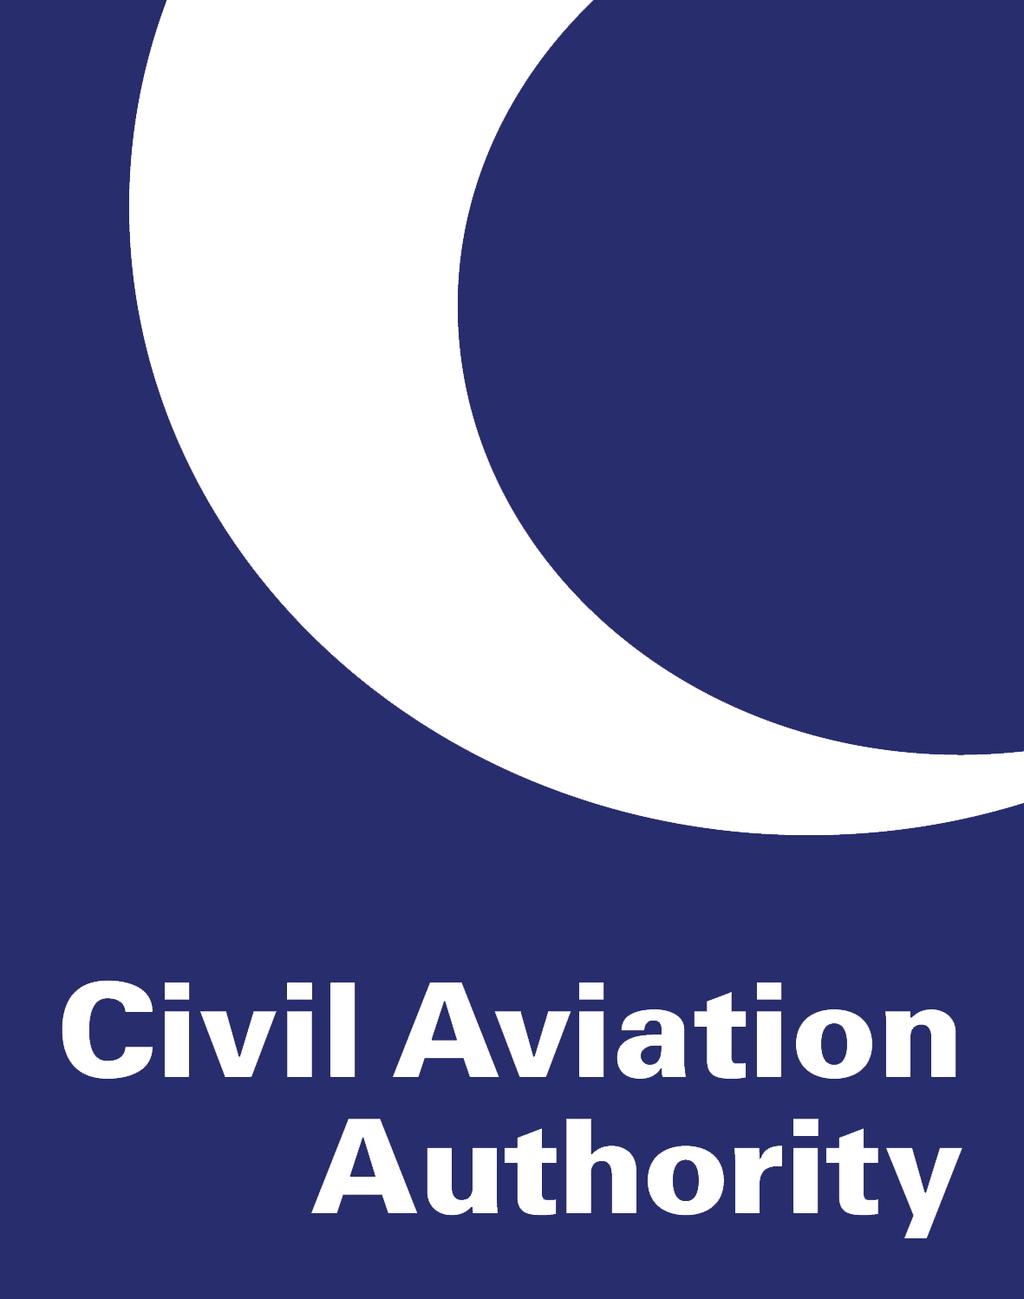 Undertakings provided to CAA under Part 8 of the Enterprise Act 2002 British Airways plc 29 July 2016 Regulation 261/2004 1 To provide information about their rights to passengers delayed by Opodo